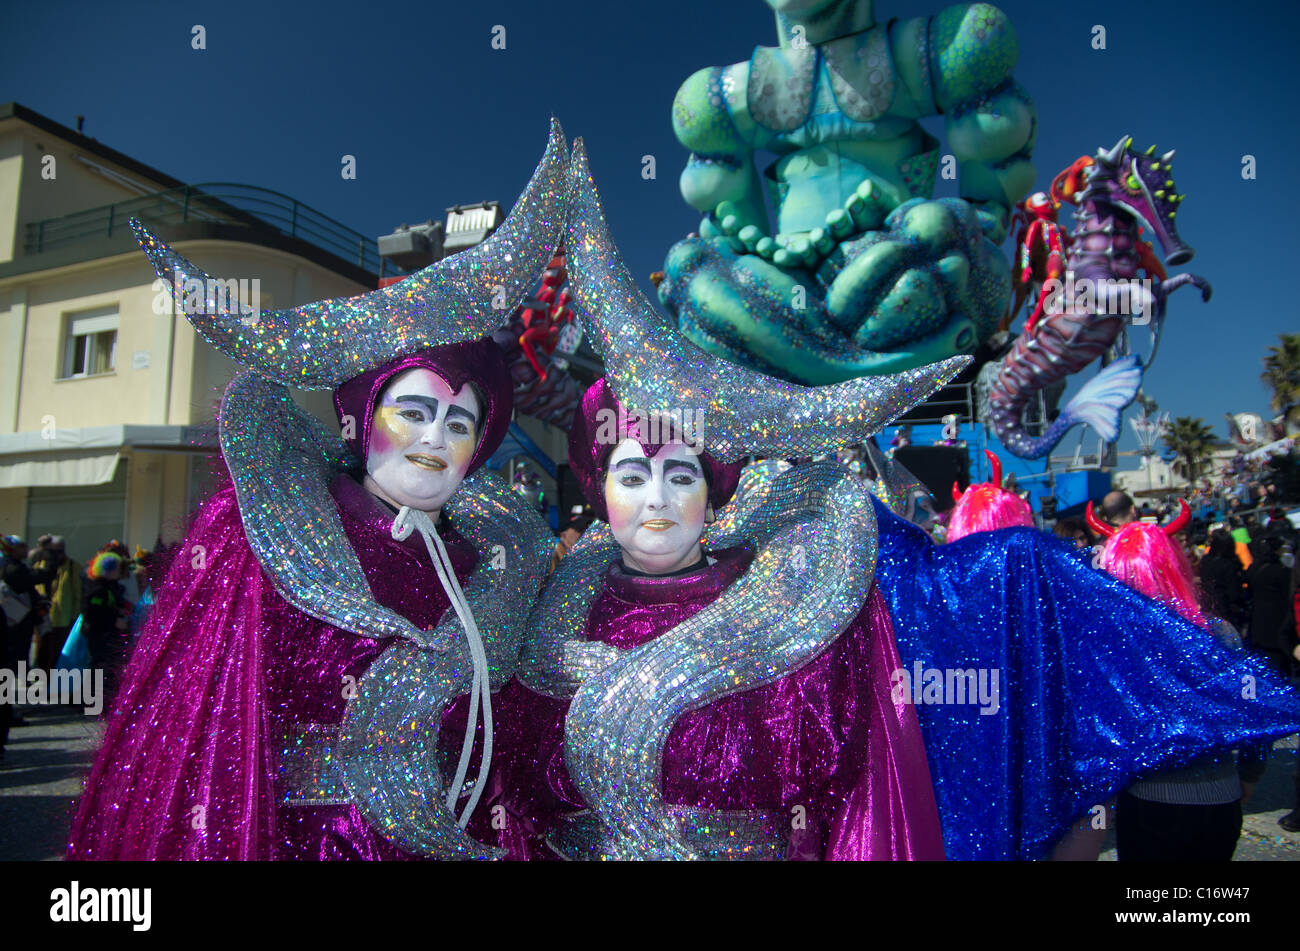 VIAREGGIO, ITALY - MARCH 6:  masked women smiling in carnival mask, during the famous Carnival of Viareggio on march 6, 2011 in Viareggio, Italy Stock Photo